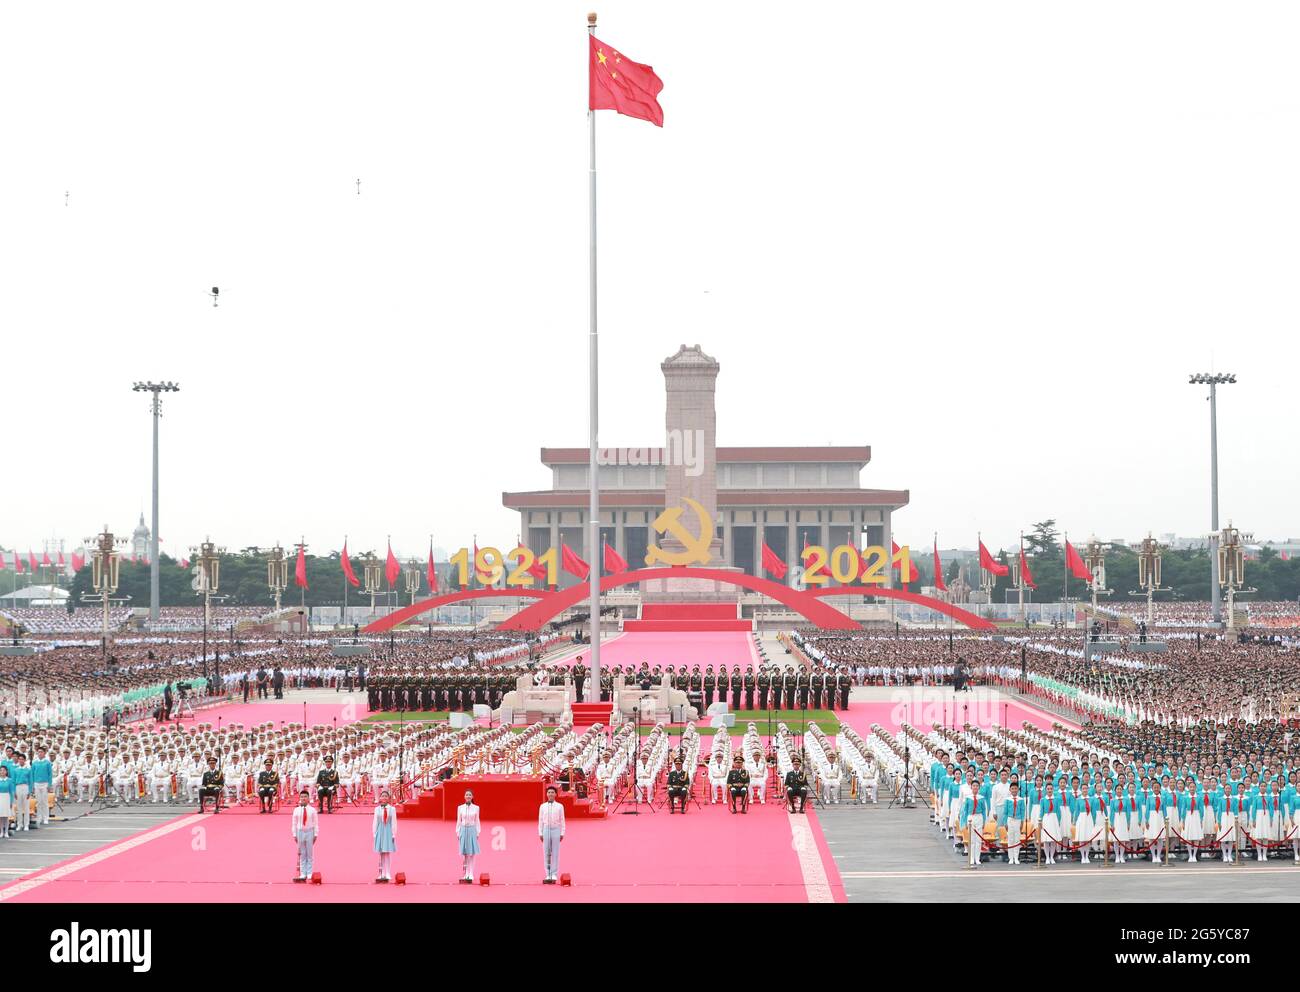 Beijing, China. 1st July, 2021. Representatives of the Chinese Communist Youth League members and Young Pioneers salute the Communist Party of China (CPC) and express commitment to the Party's cause at a ceremony marking the CPC centenary at Tian'anmen Square in Beijing, capital of China, July 1, 2021. Credit: Pang Xinglei/Xinhua/Alamy Live News Stock Photo